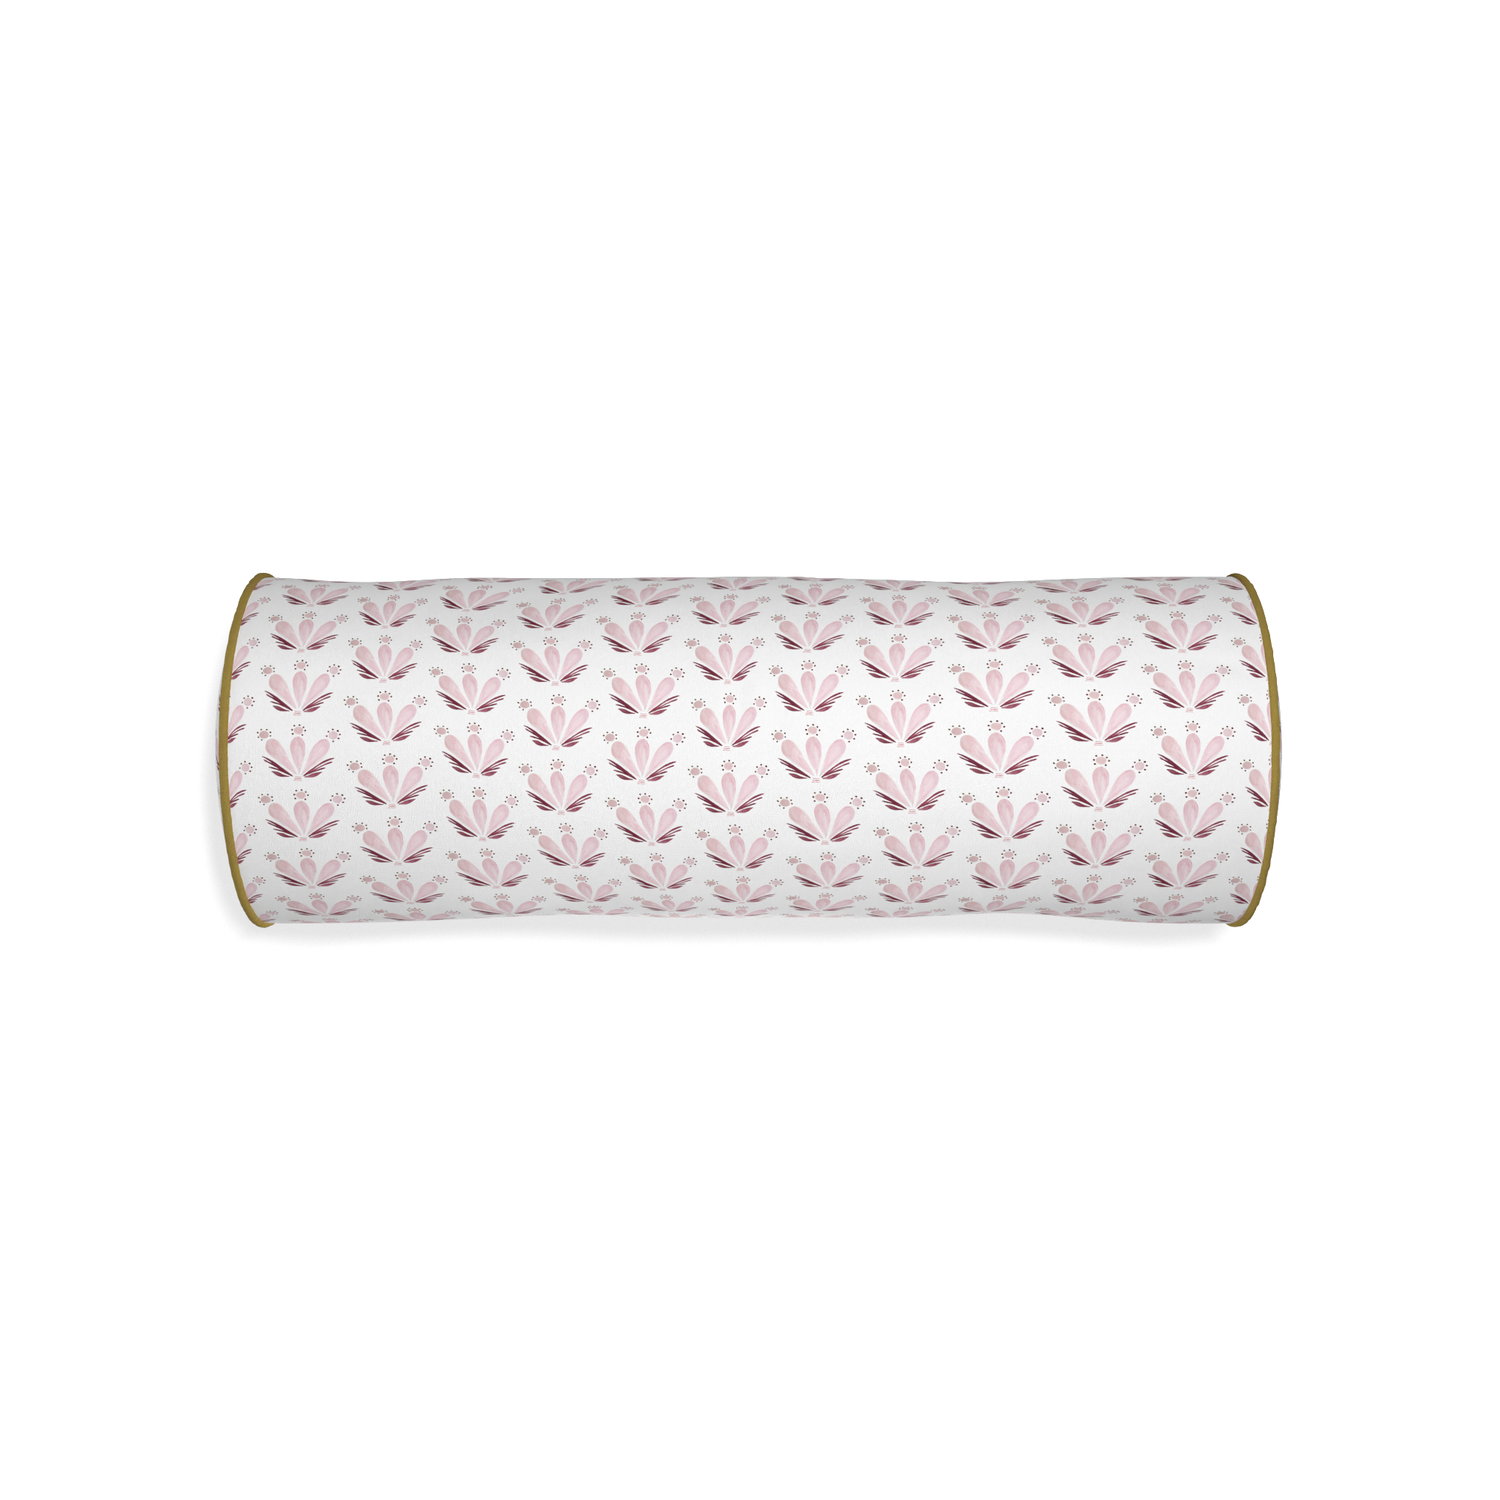 Bolster serena pink custom pink & burgundy drop repeat floralpillow with c piping on white background